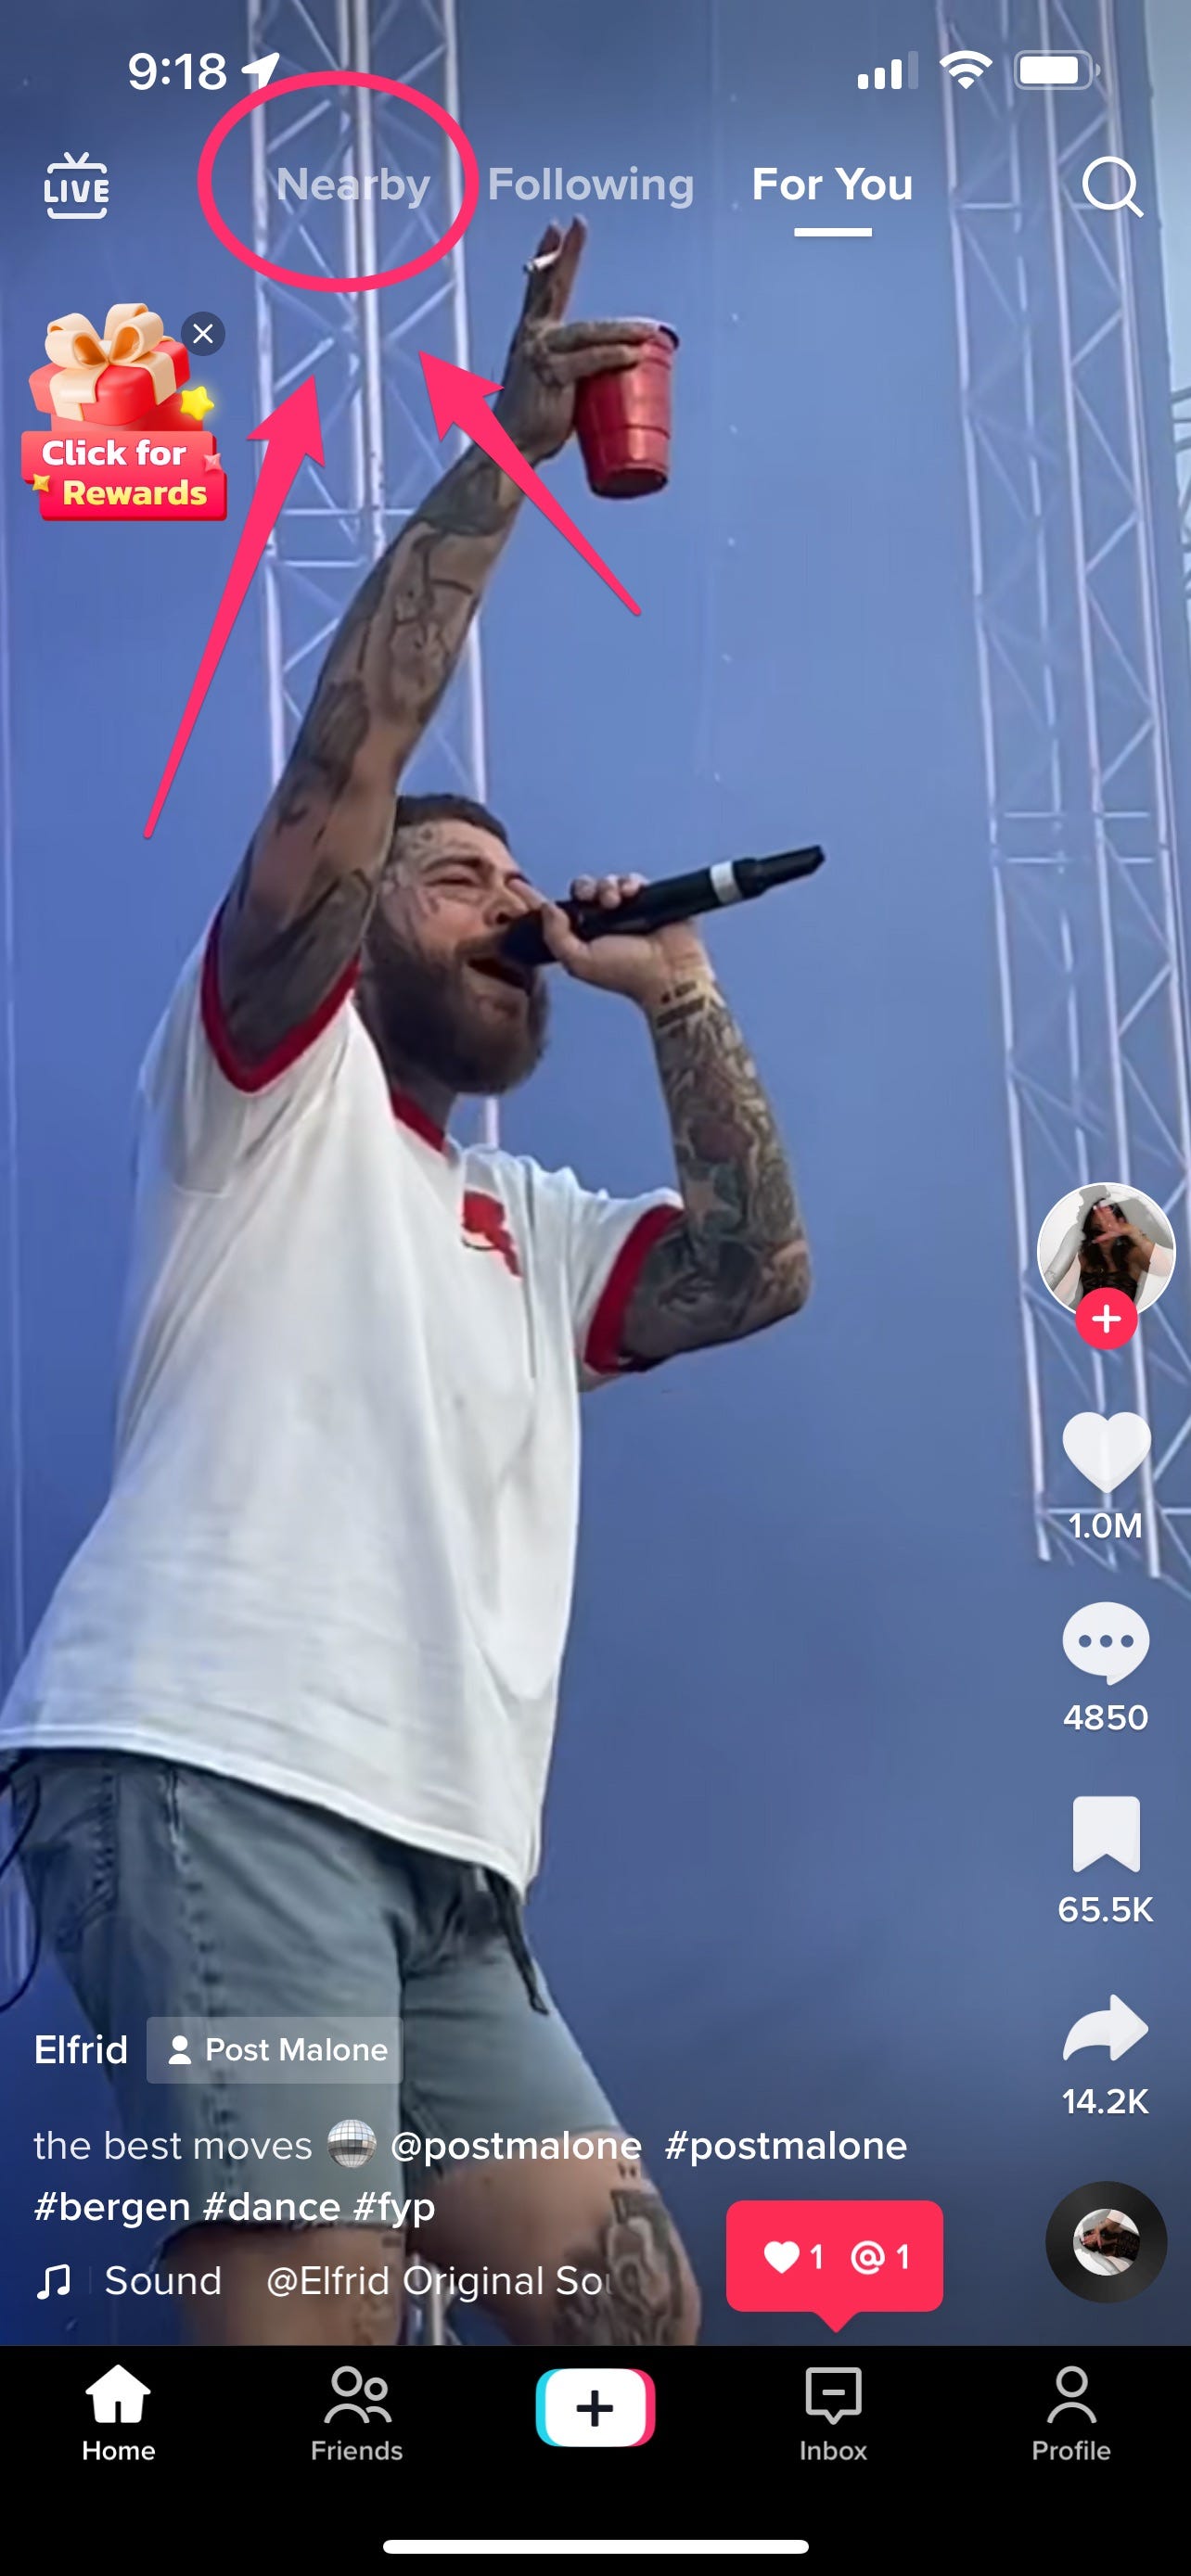 TikTok's Nearby Feed spotted at a Post Malone concert